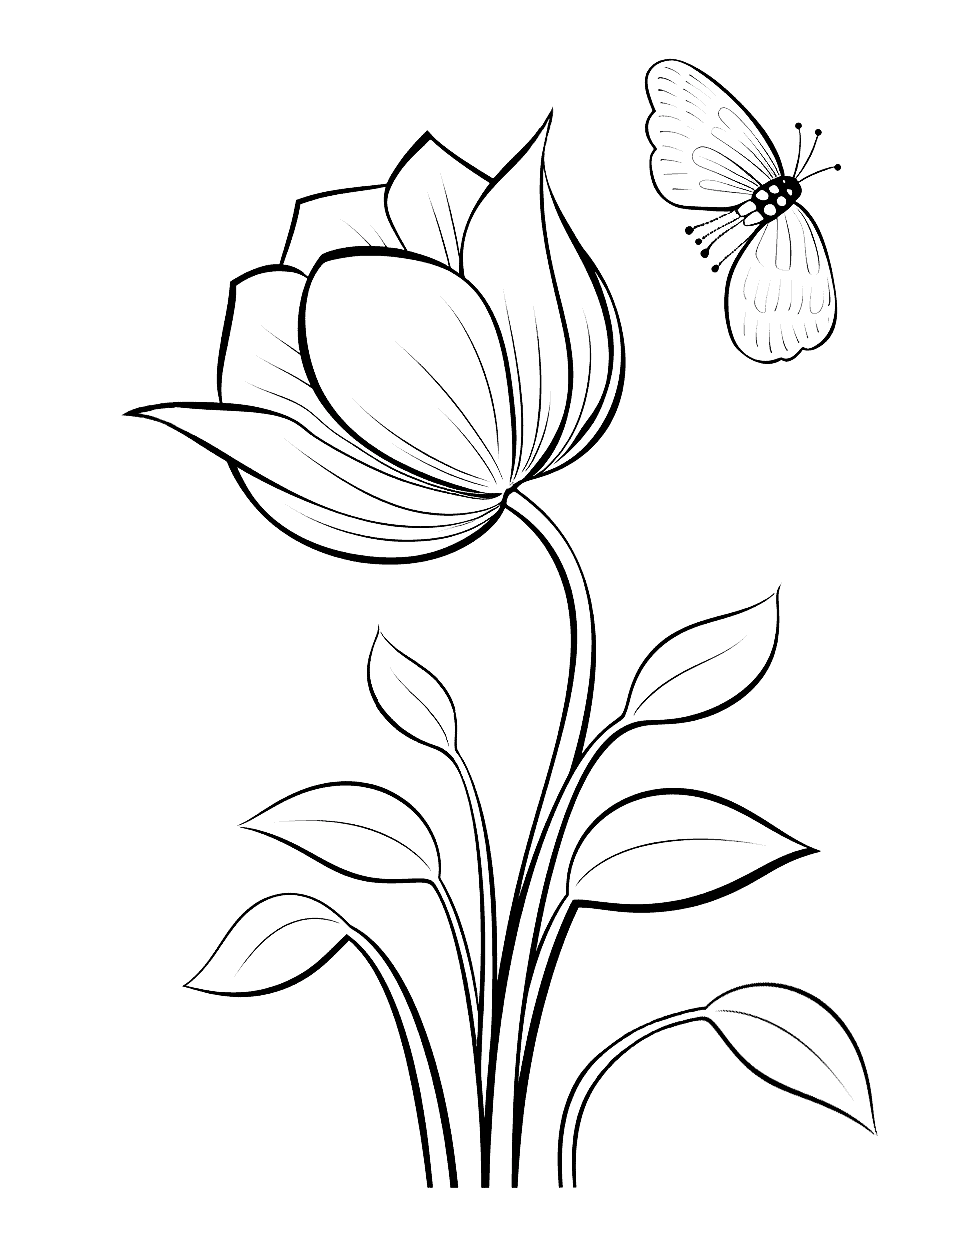 Butterfly on Tulip Flower Coloring Page - A cute butterfly sitting on a beautiful tulip.